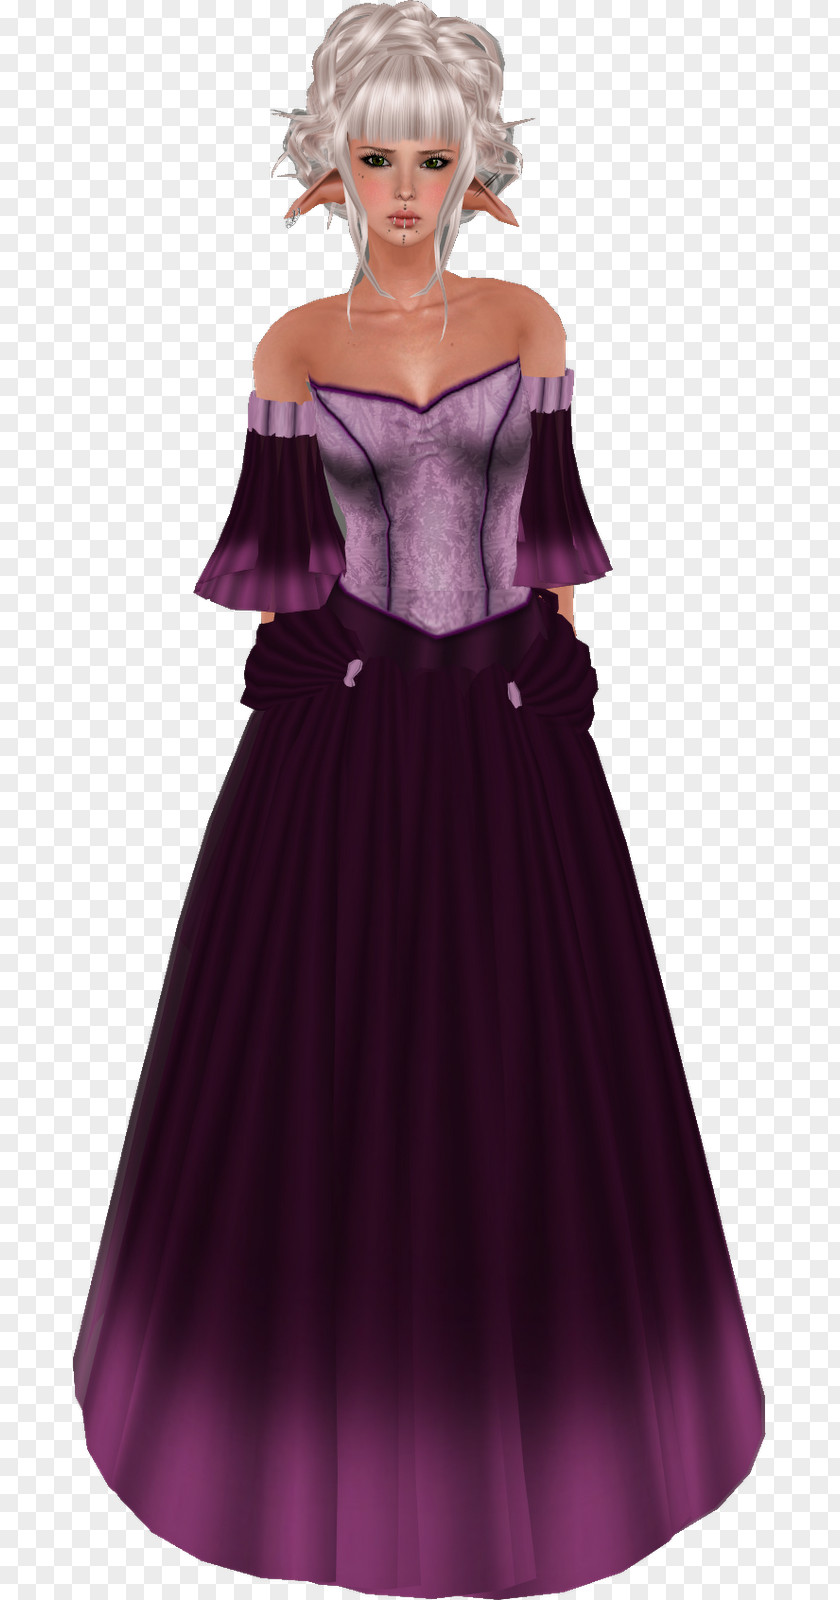 Dress Gown Cocktail Satin PNG